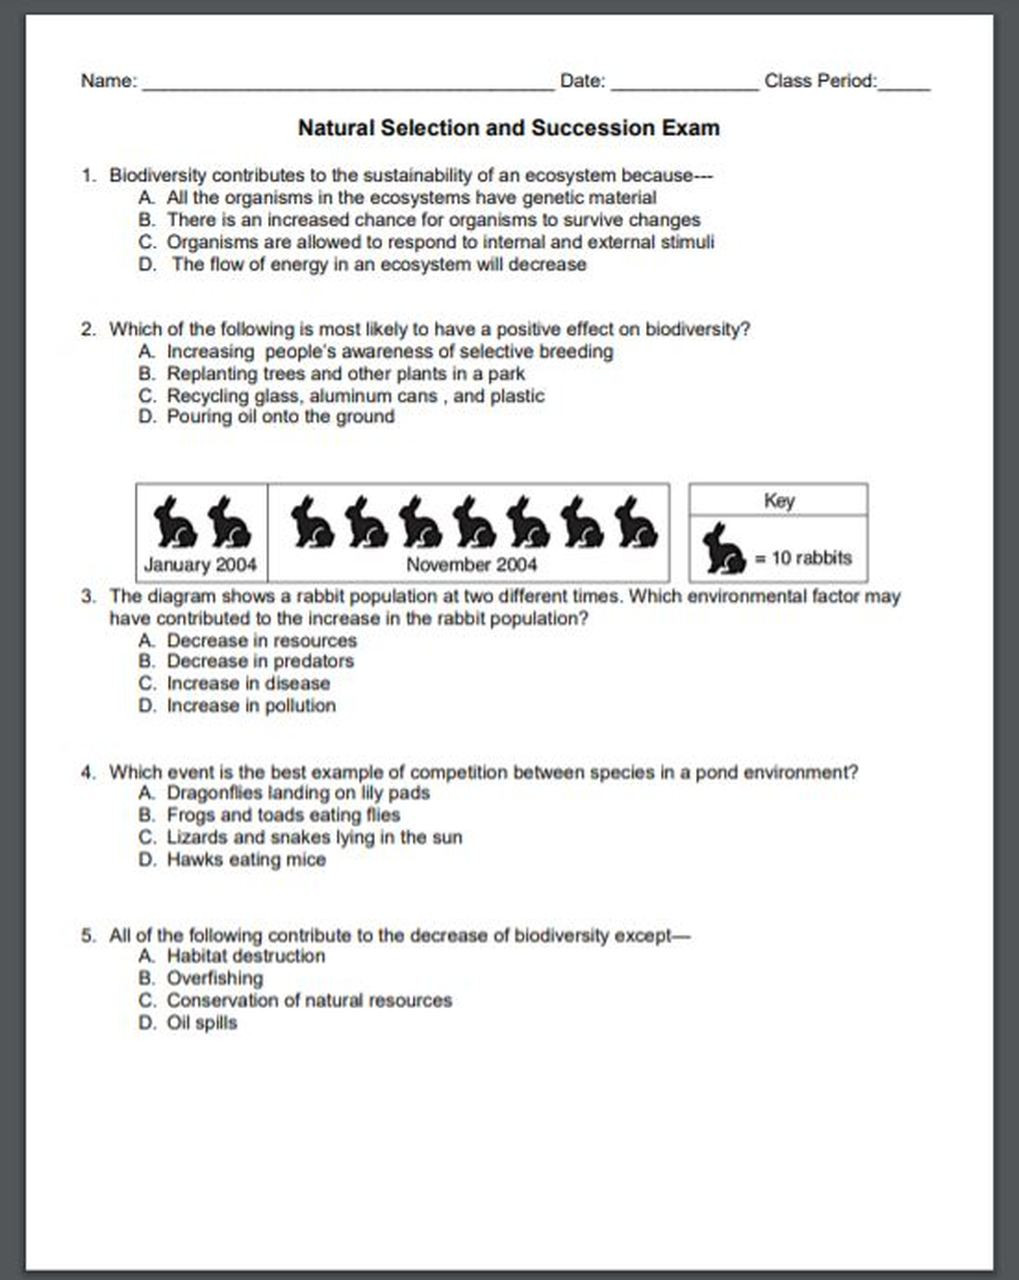 Ecological Succession Worksheet High School Natural Selection and Succession Exam